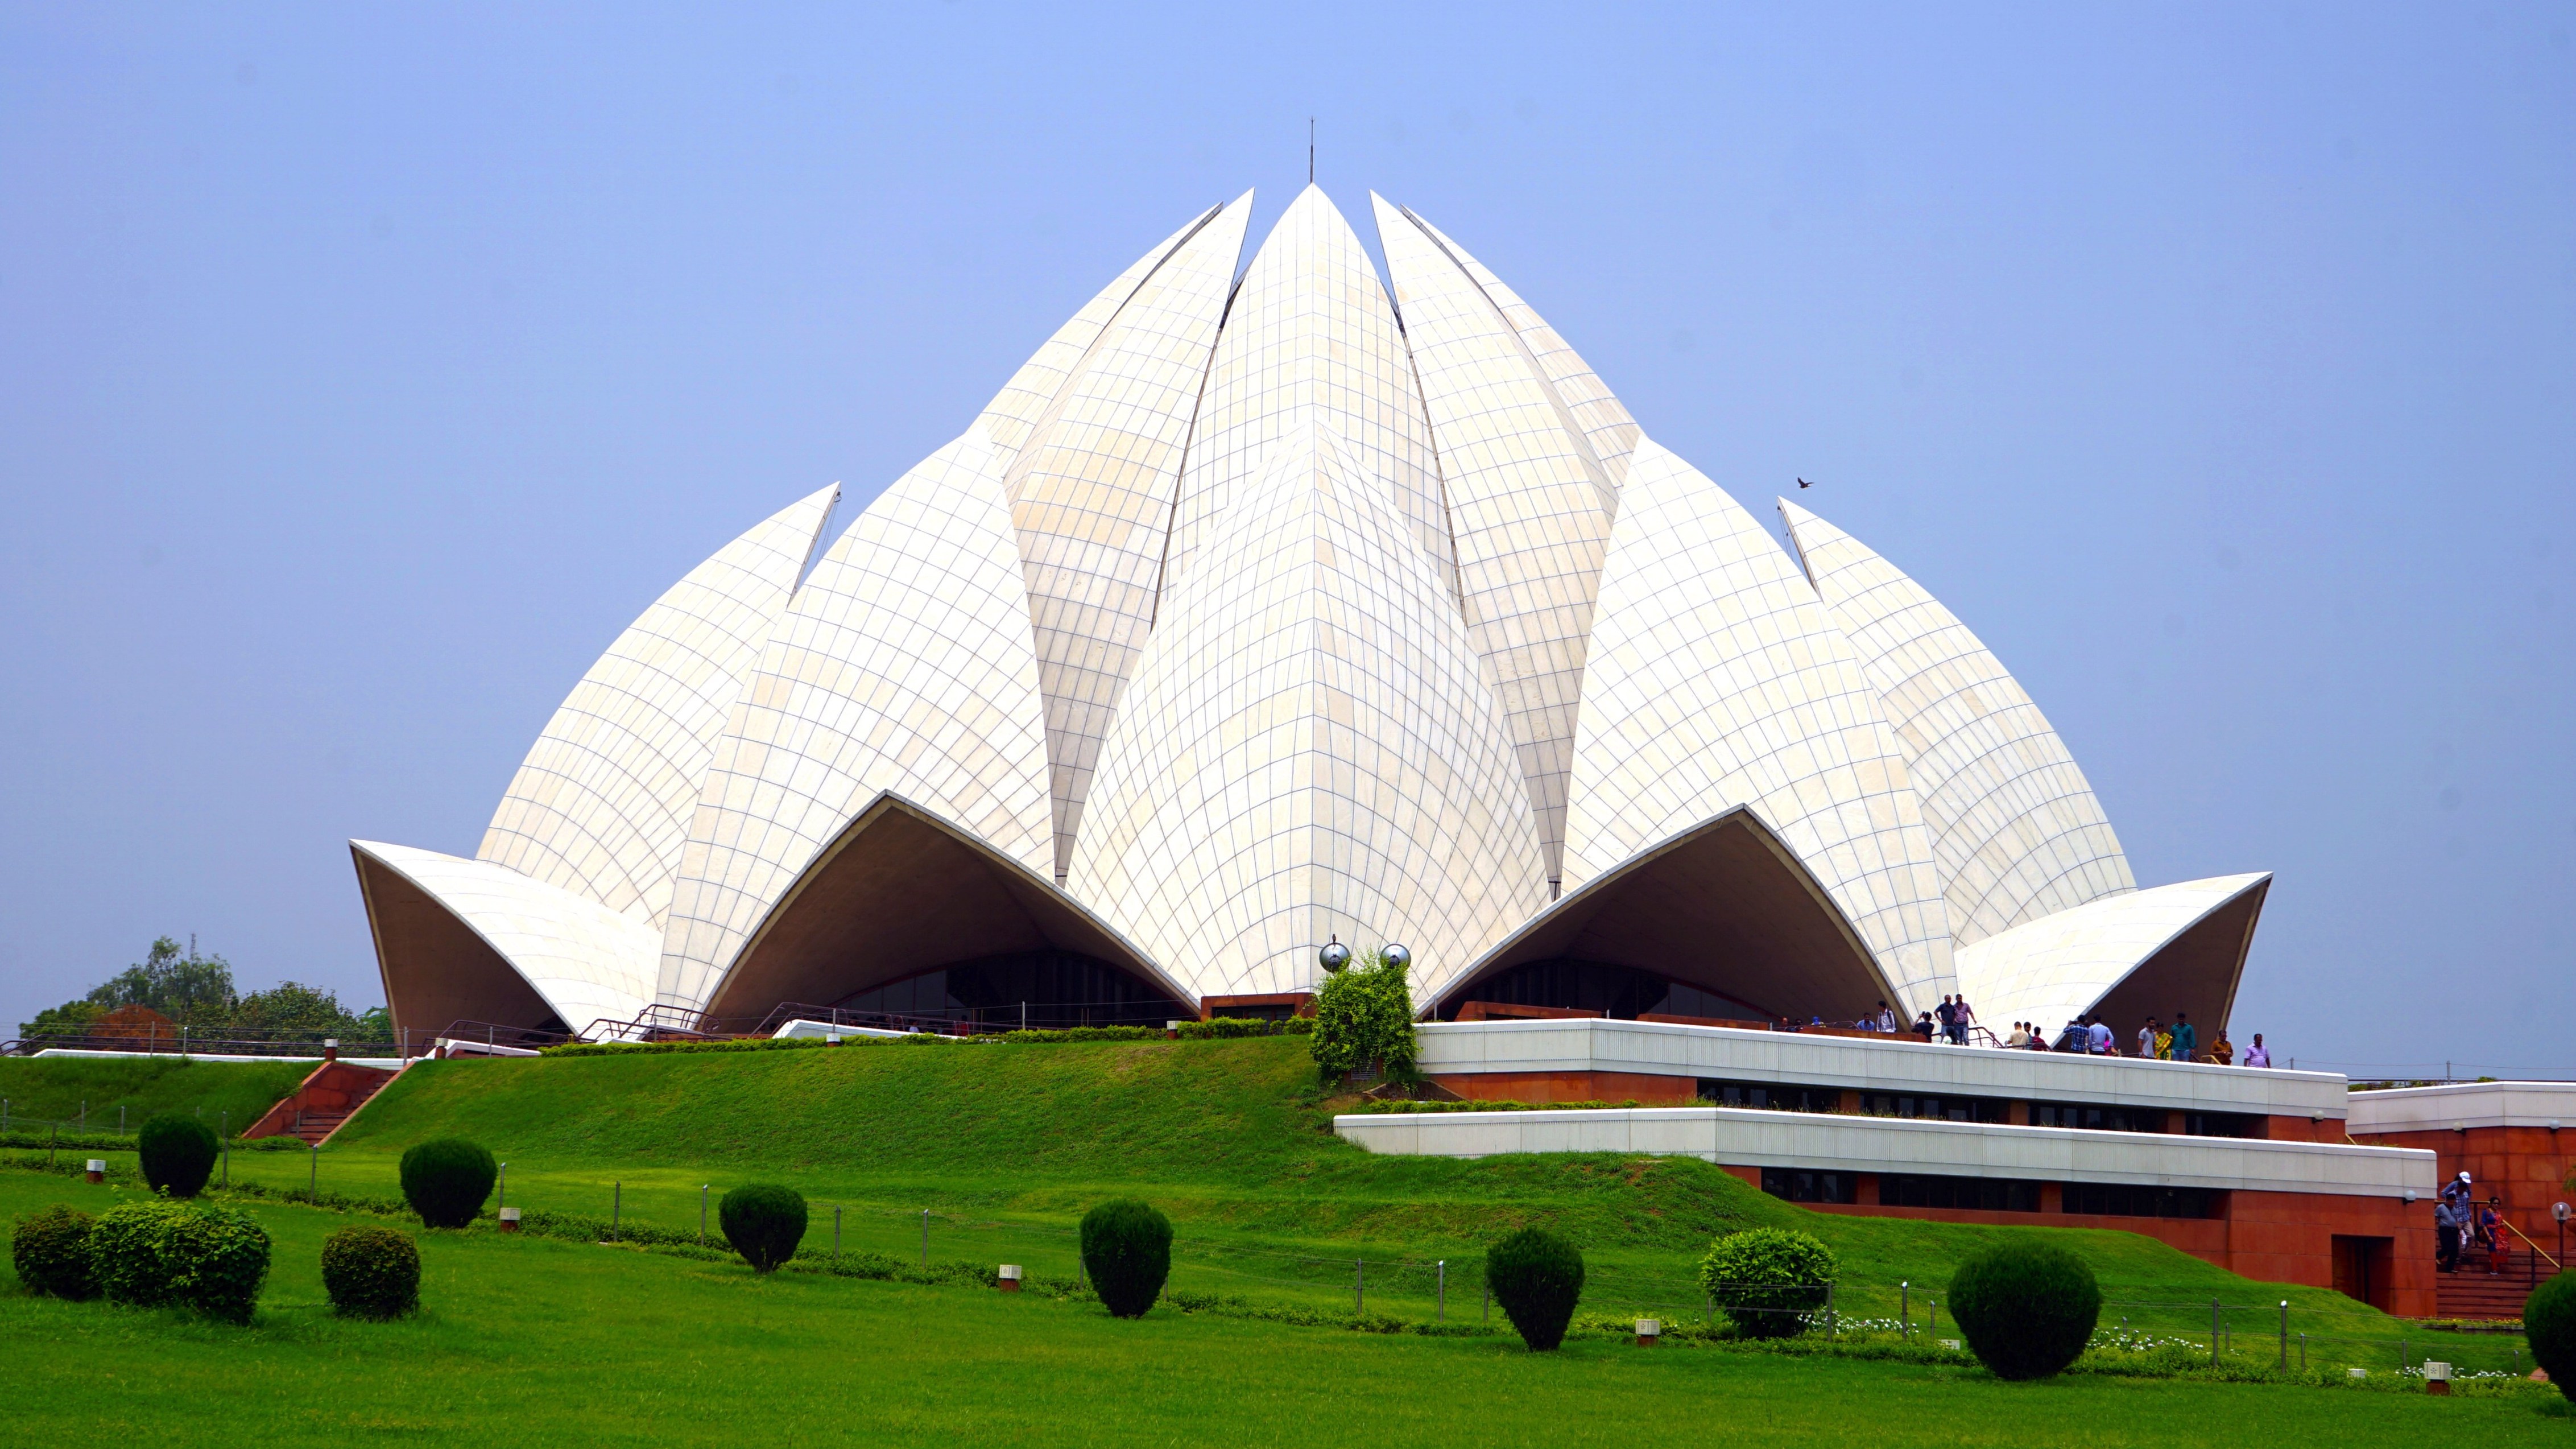 Q15: The Lotus Temple is located in which Indian city?